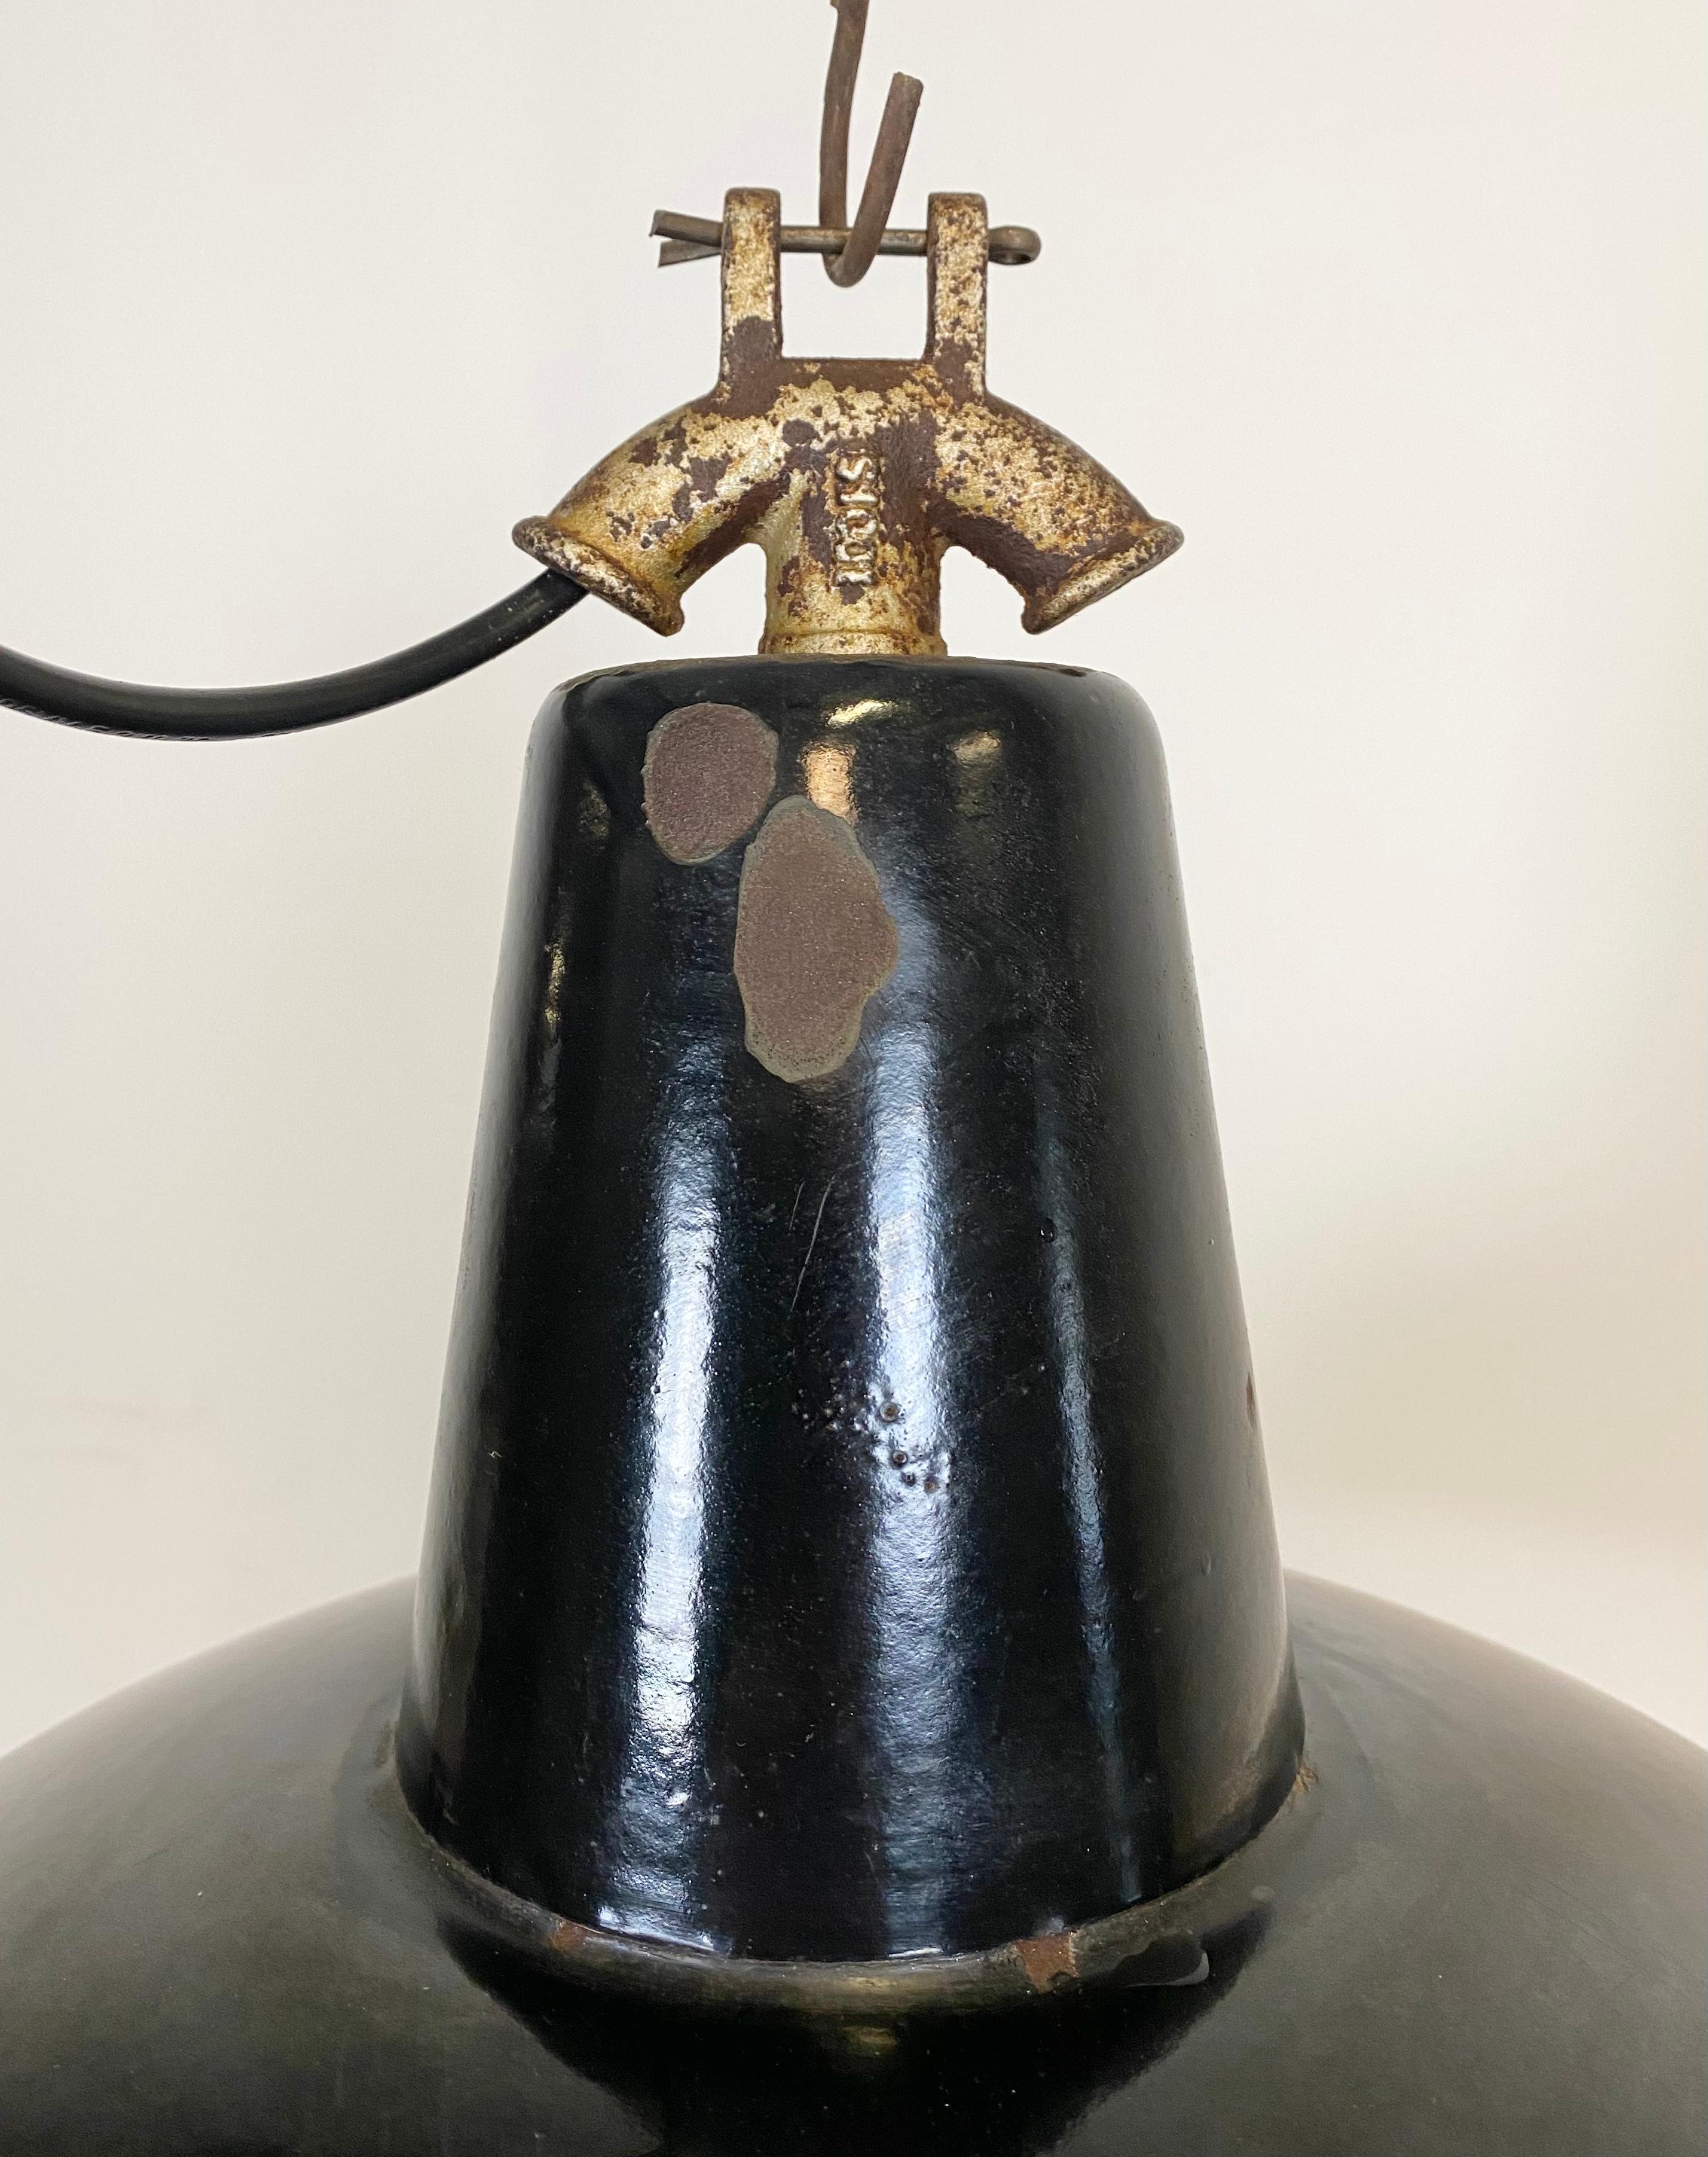 Industrial pendant light from former Czechoslovakia, previously used in a factories. Made from enamelled metal. Black outside, white interior. Interesting cast iron top. New porcelain socket for E 27 lightbulbs and wire. The weight of the lamp is 2